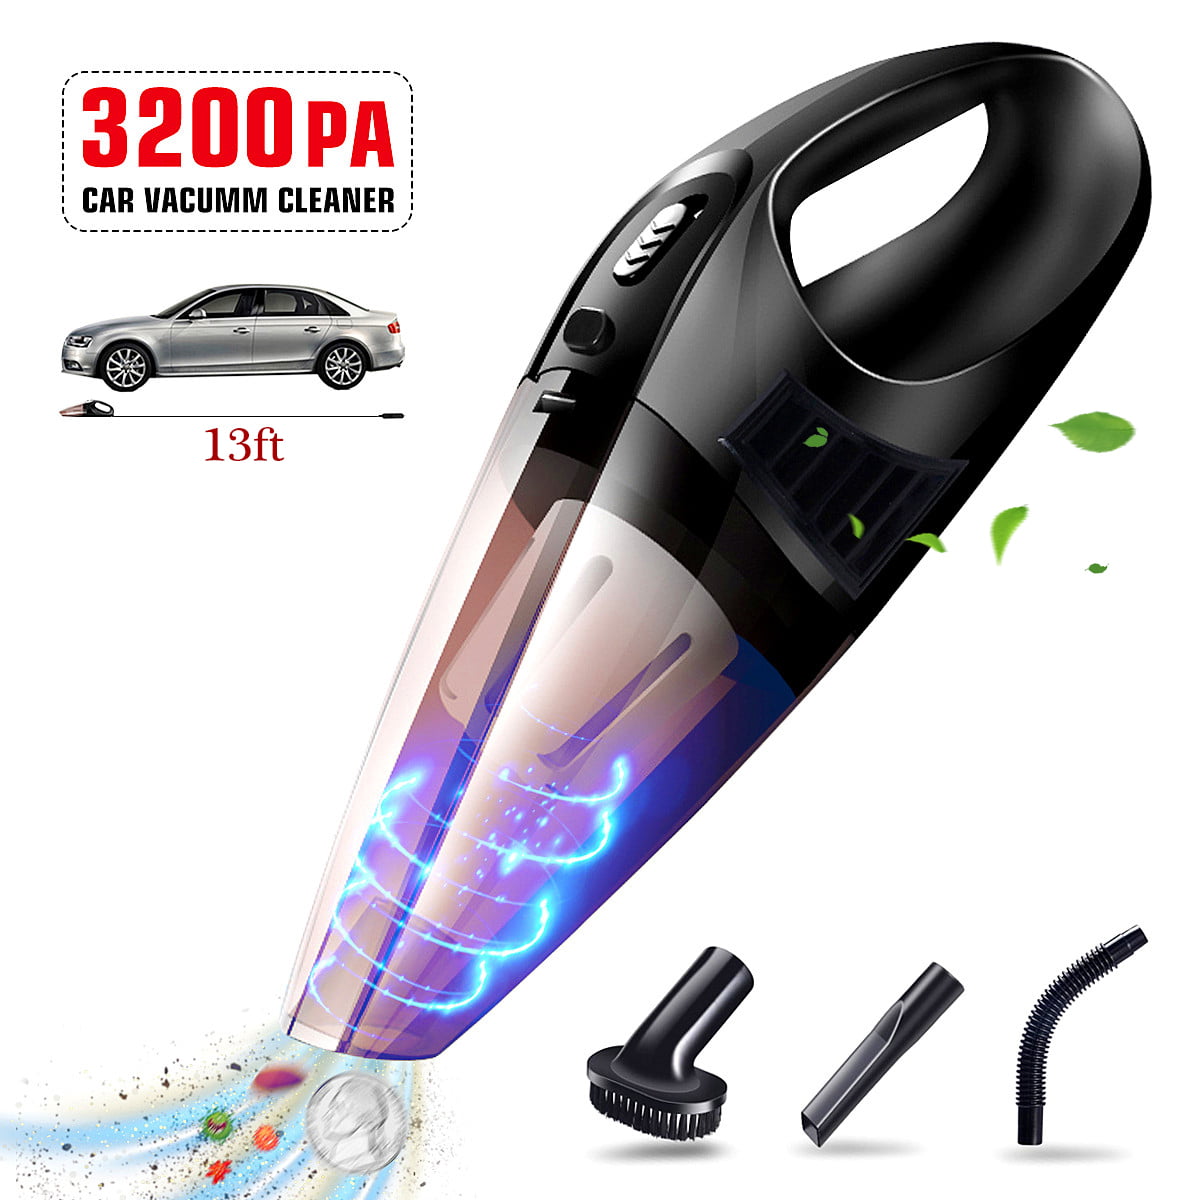 Mini Duster Car Vacuum Cleaner Home Cleaning Wet Dry Sale Hot Q1P0 